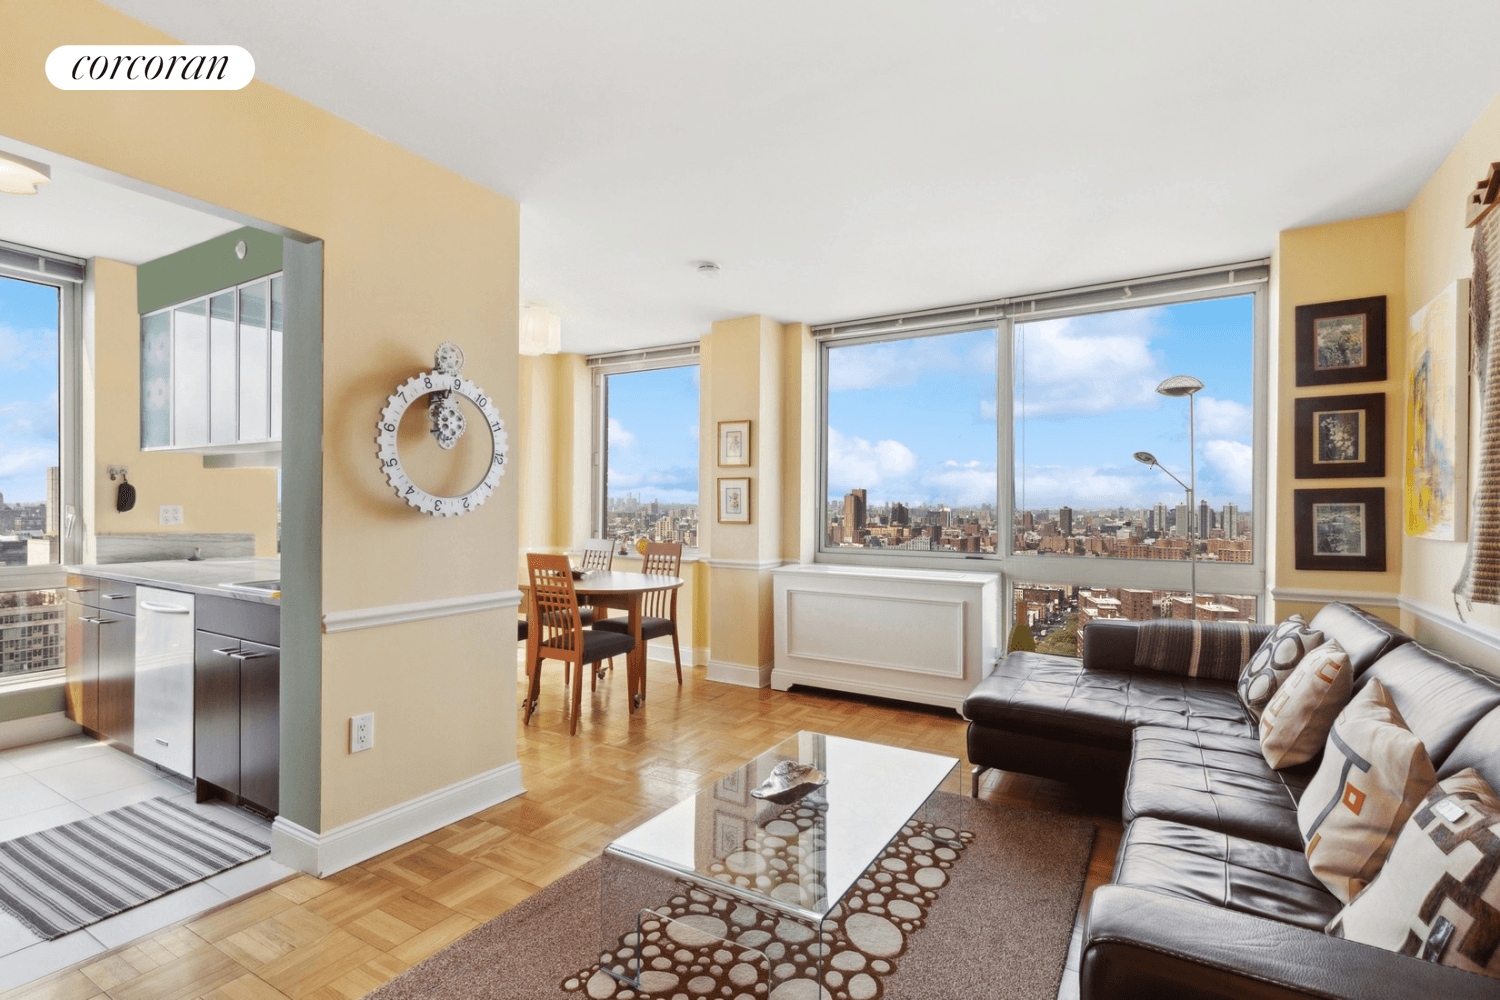 Rarely available, this stunning home is perched high up on the 32nd floor of One Carnegie Hill, offering spectacular city and river views from the north, west and east.